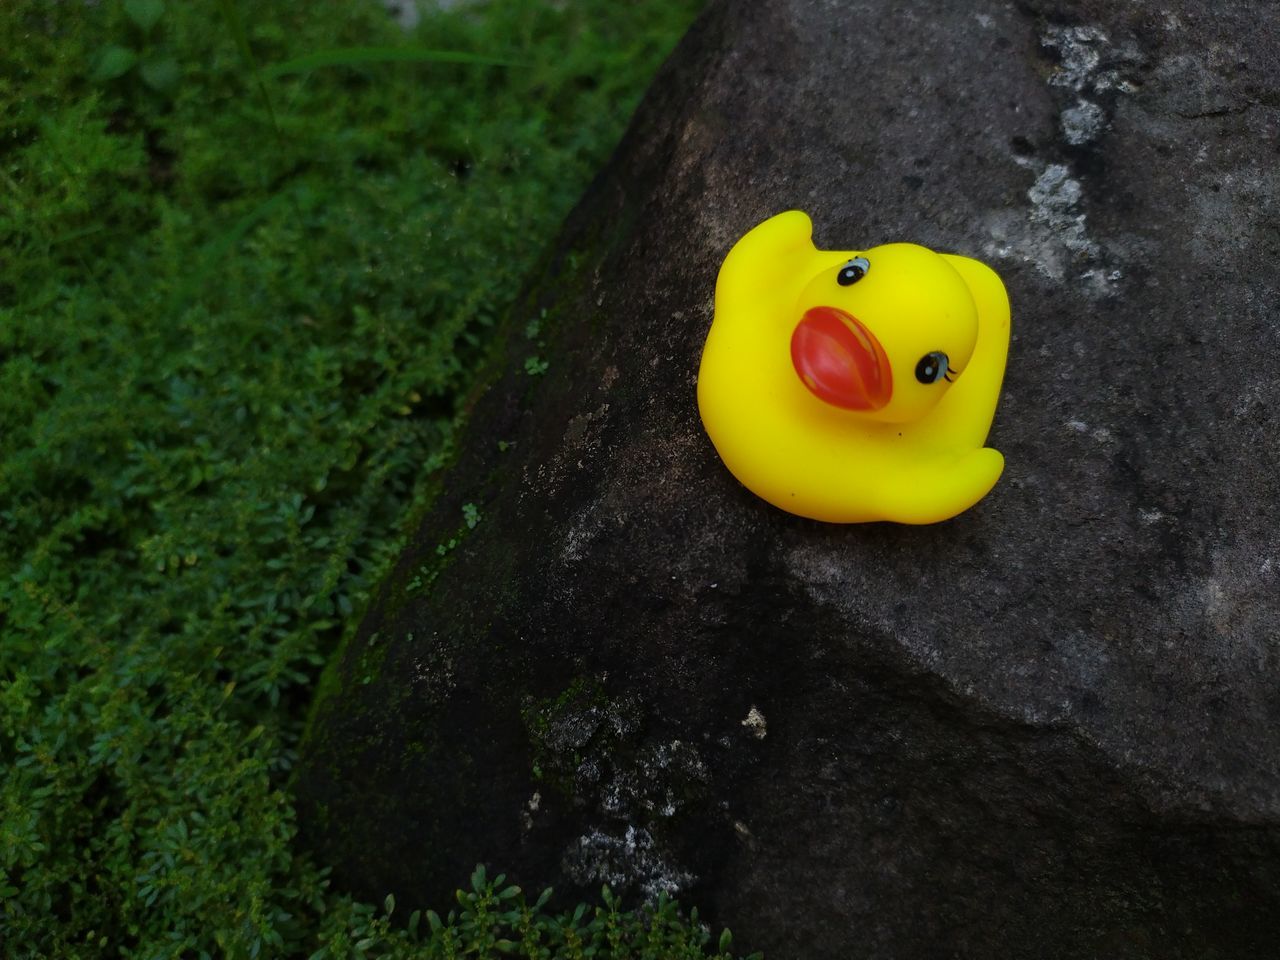 green, yellow, animal representation, duck, rubber duck, representation, toy, water bird, no people, nature, plant, high angle view, bird, day, animal, outdoors, single object, ducks, geese and swans, grass